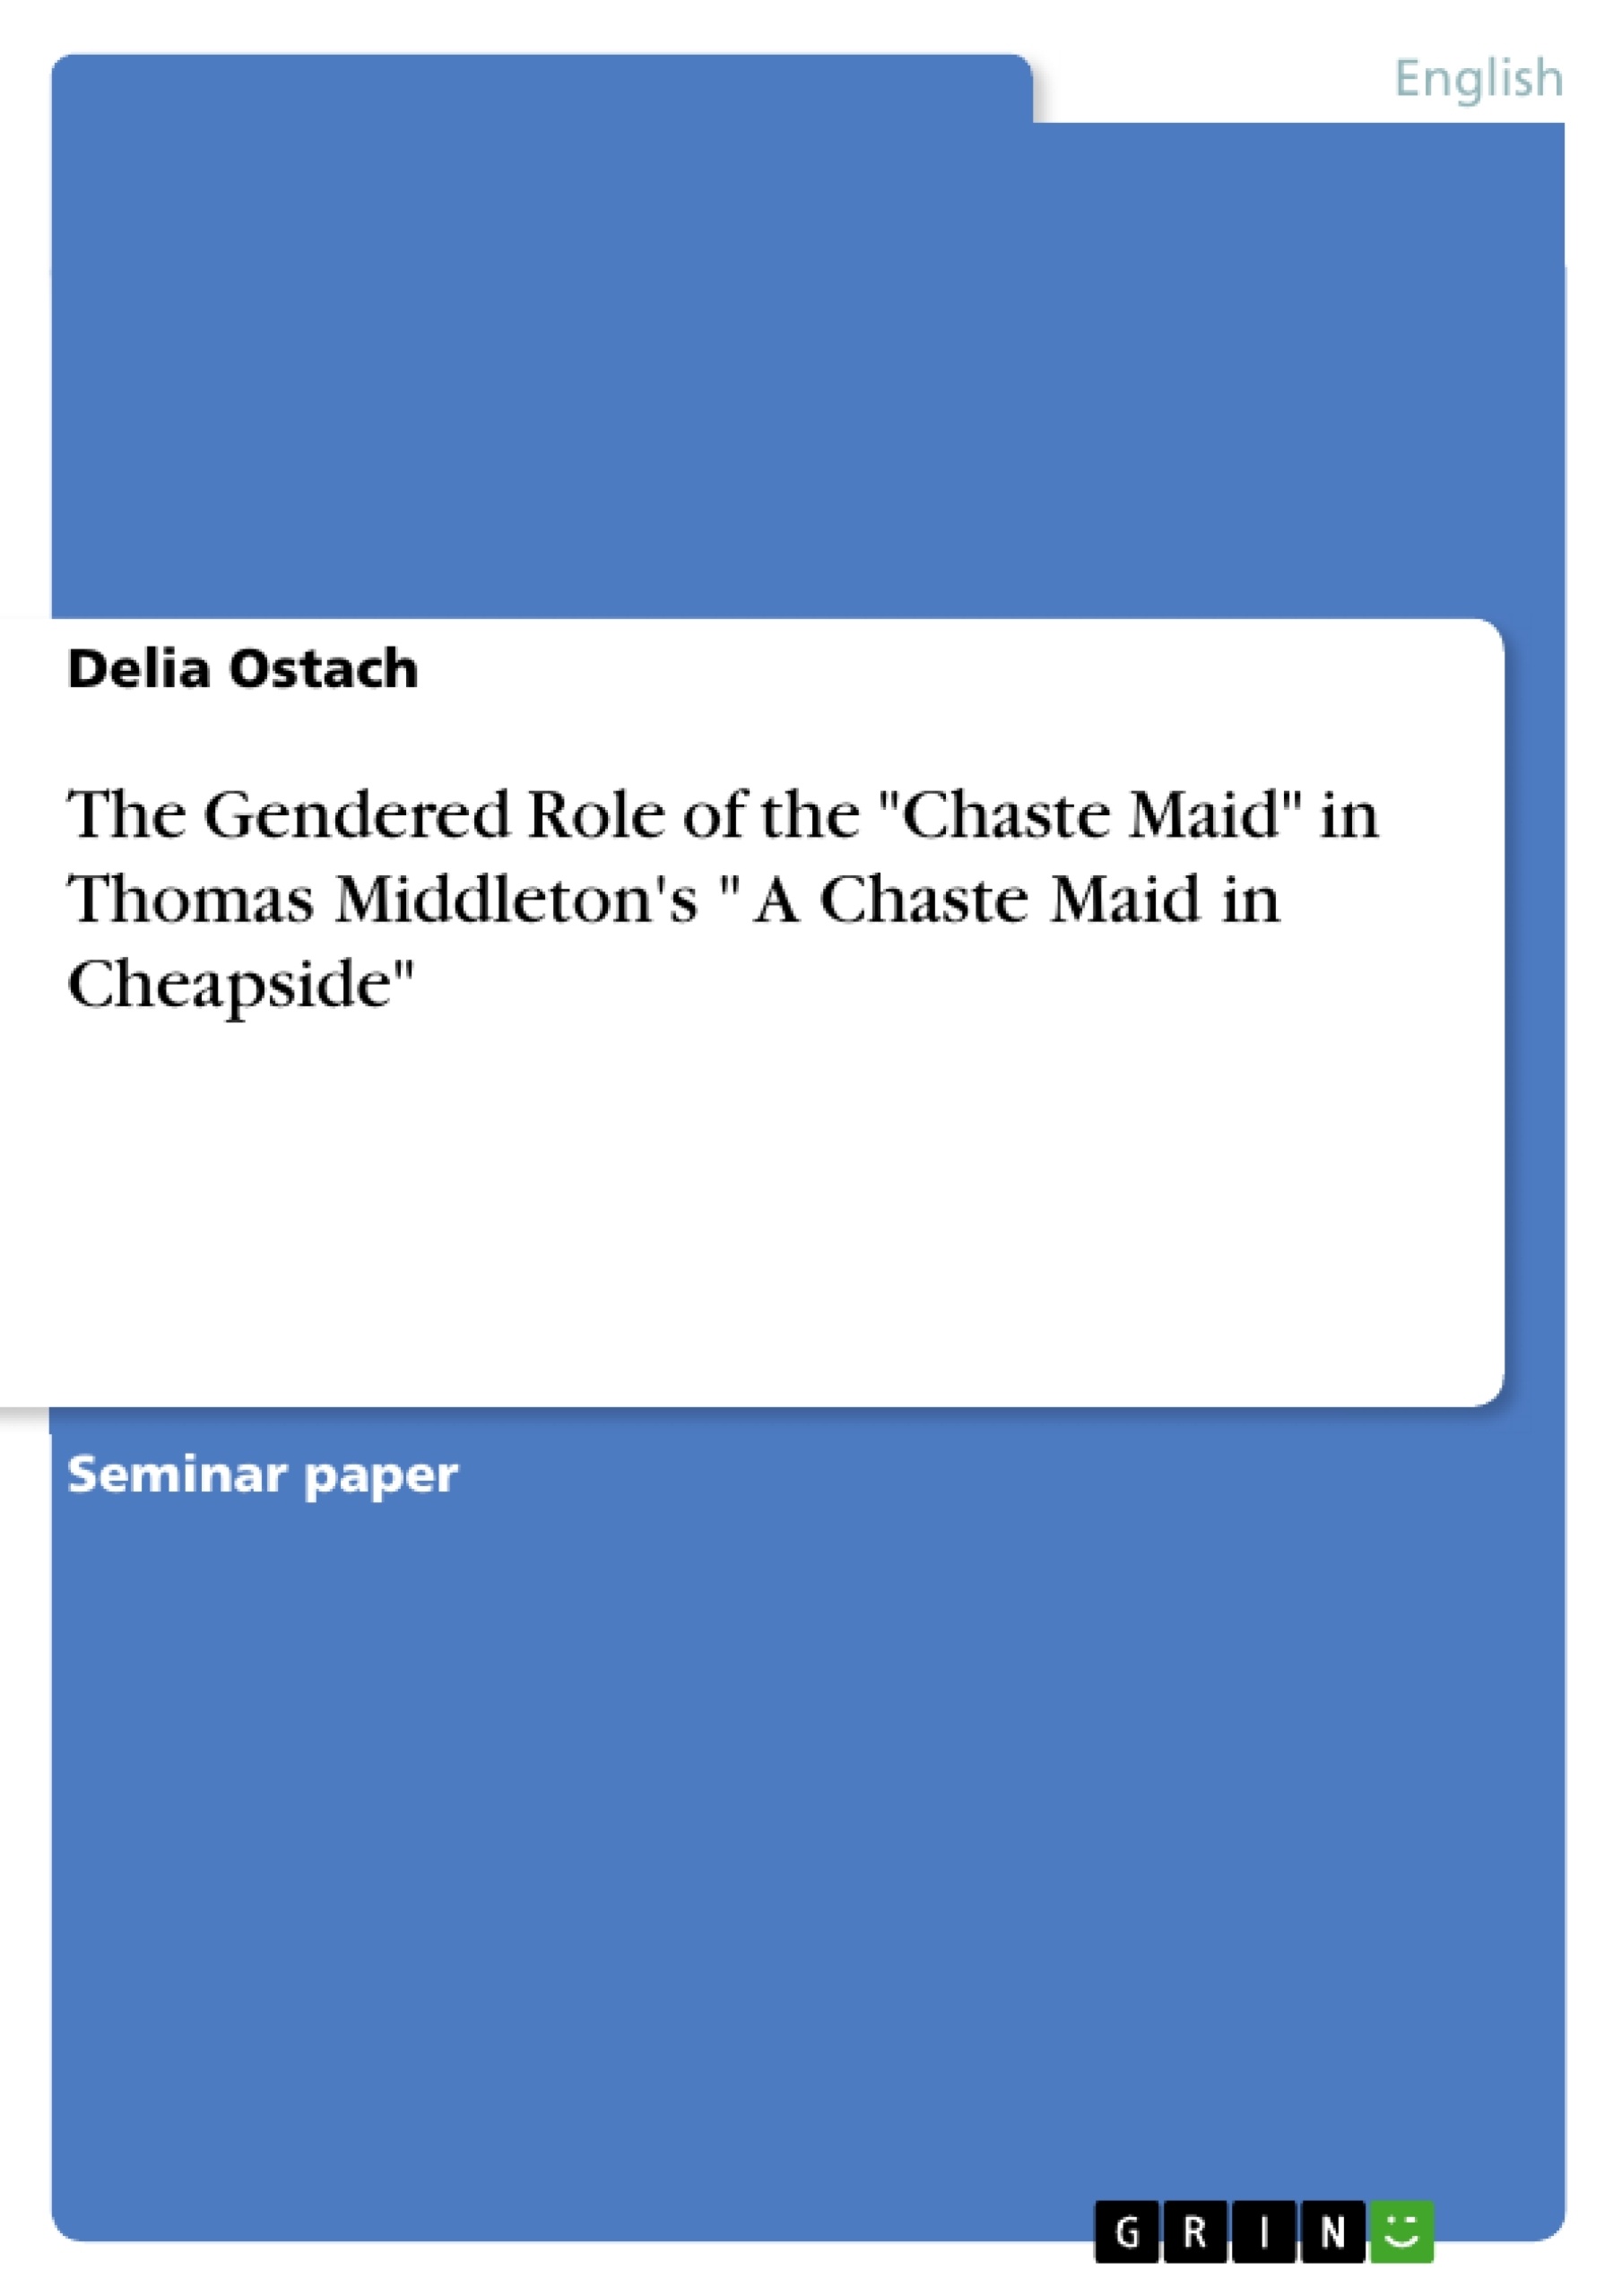 Título: The Gendered Role of the "Chaste Maid" in Thomas Middleton's " A Chaste Maid in Cheapside"